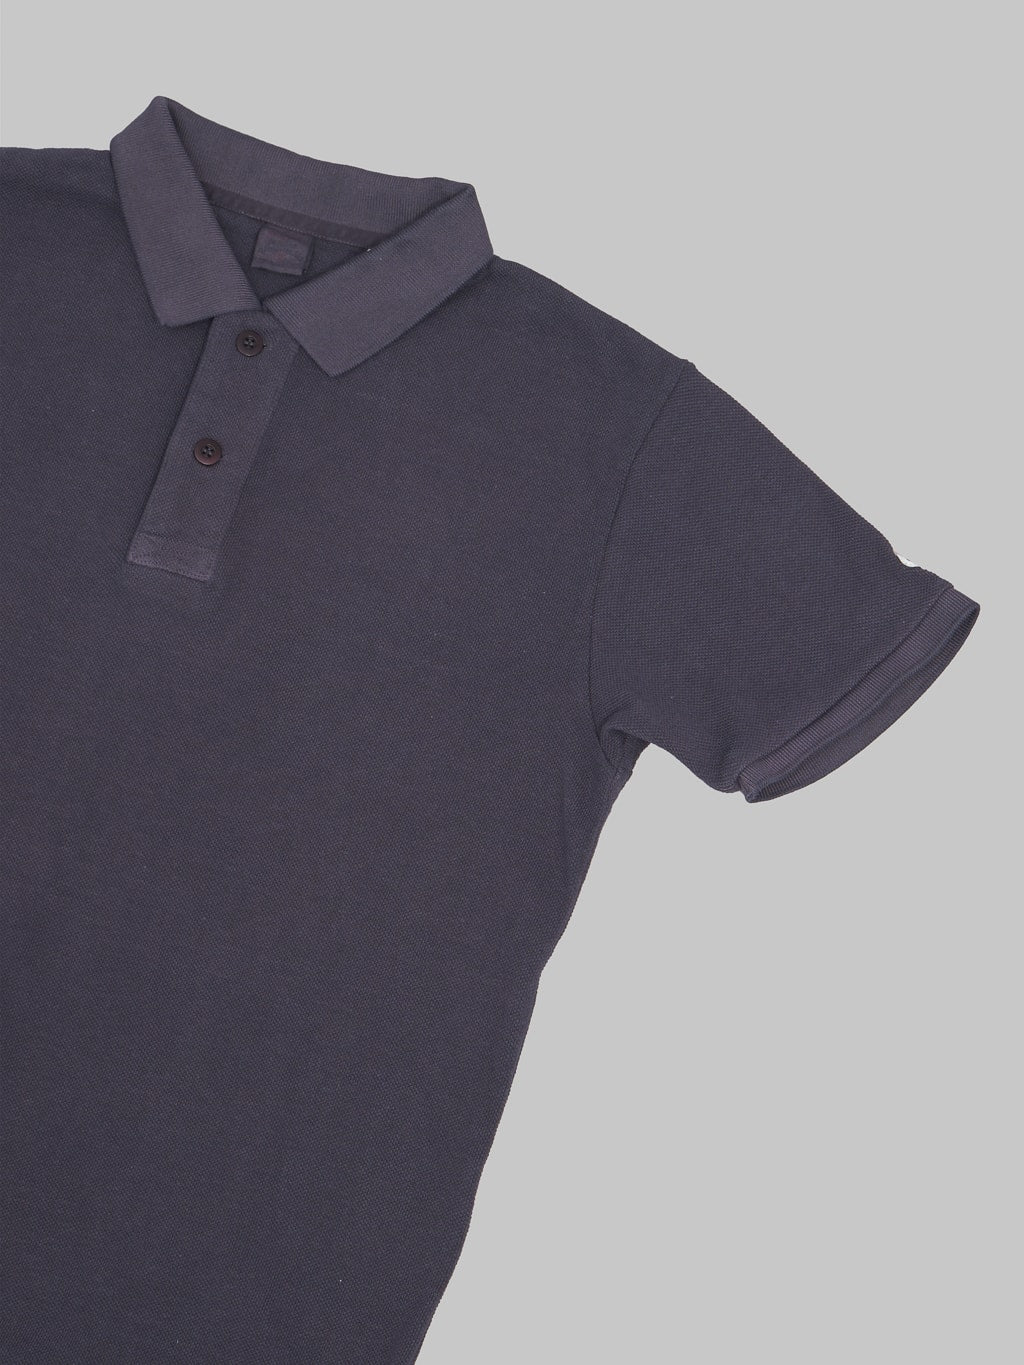 ues polo shirt navy sleeve stitching detail